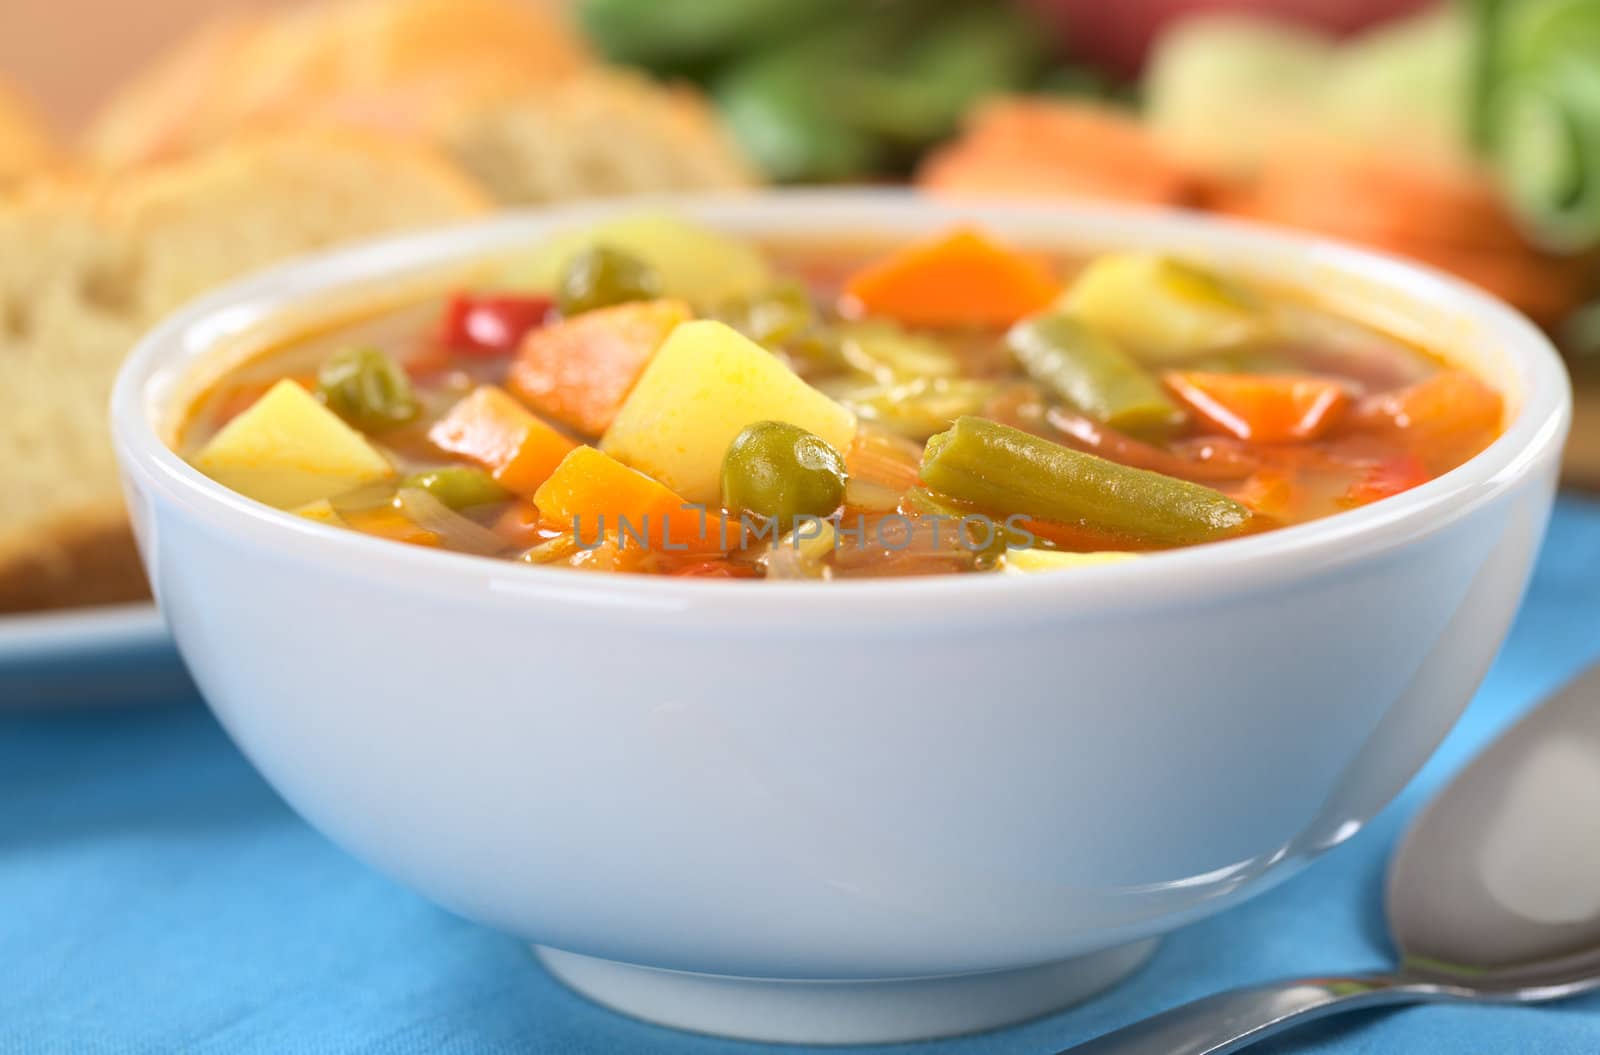 Fresh vegetable soup made of green bean, pea, carrot, potato, red bell pepper, tomato and leek in white bowl with baguette slices and ingredients in the back (Selective Focus, Focus on the vegetables one third into the soup)